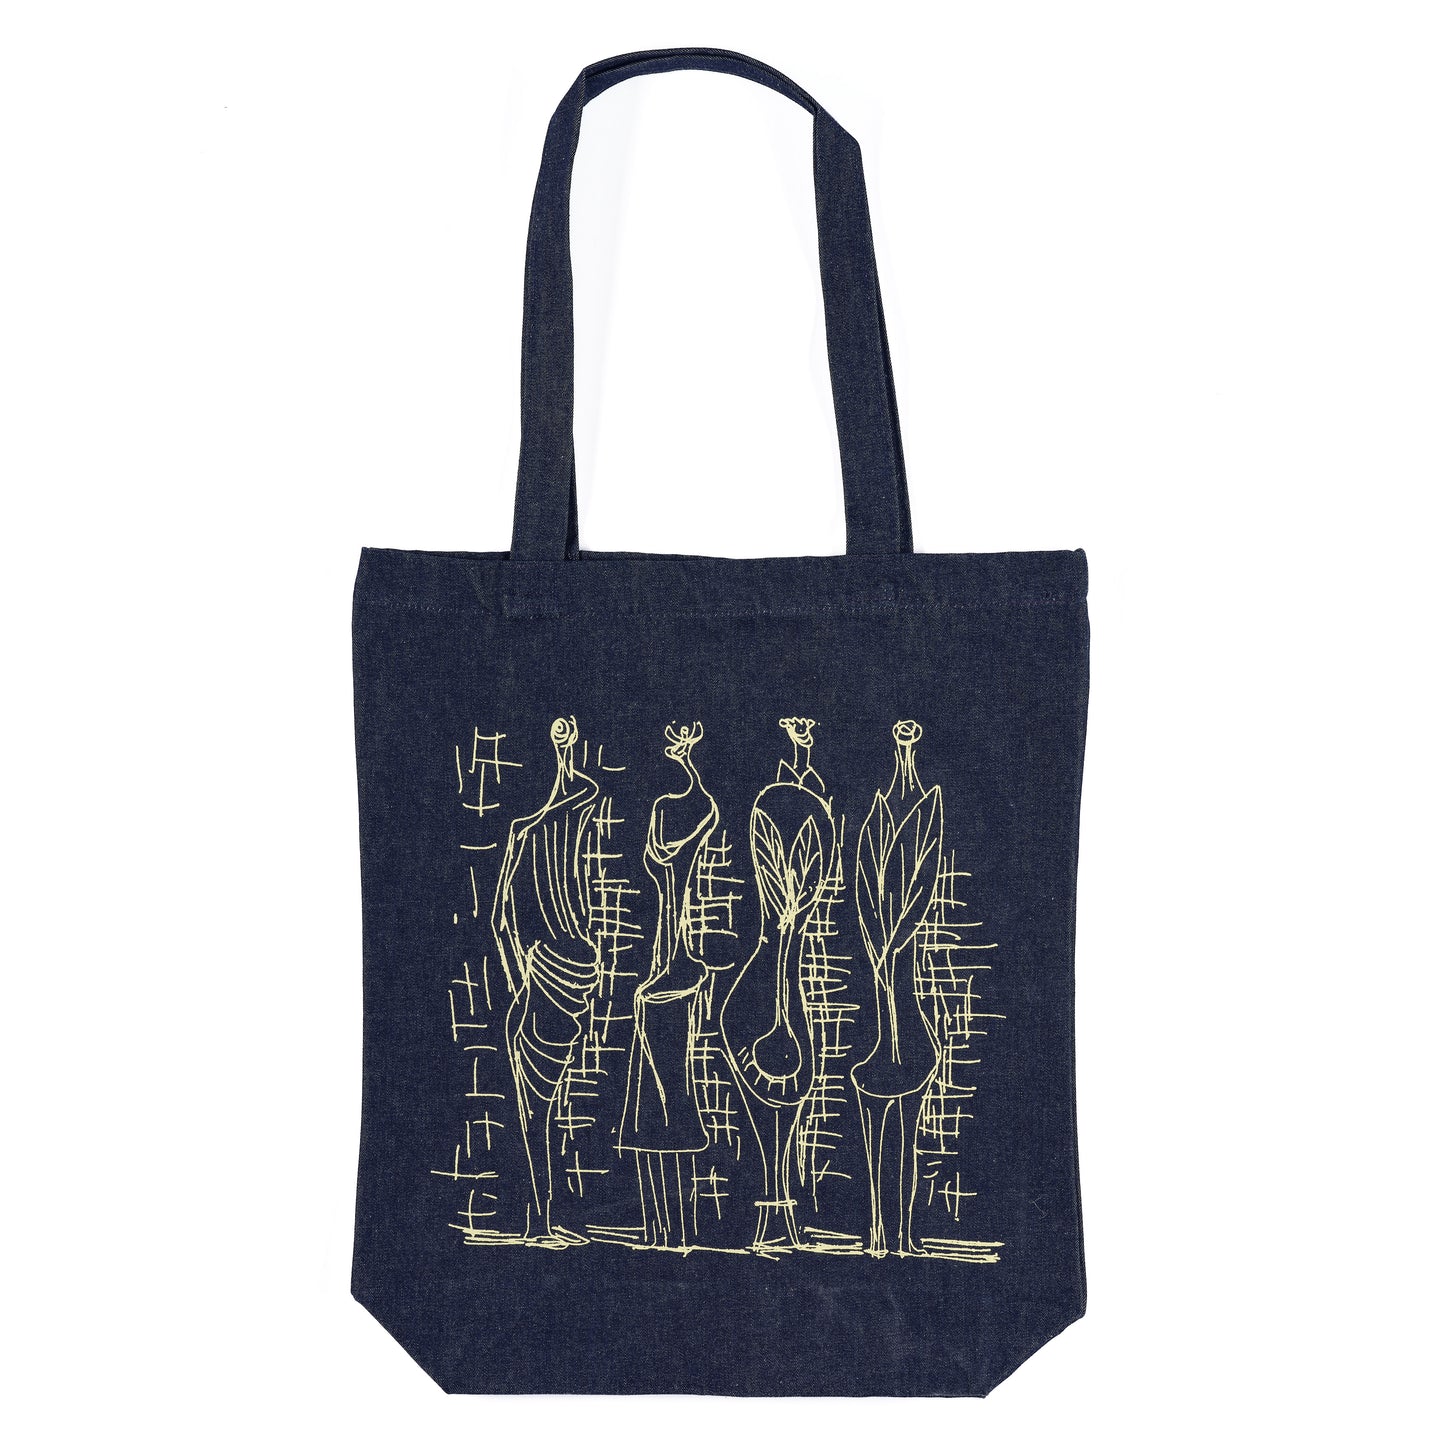 Henry Moore Quote Tote Bag (denim)